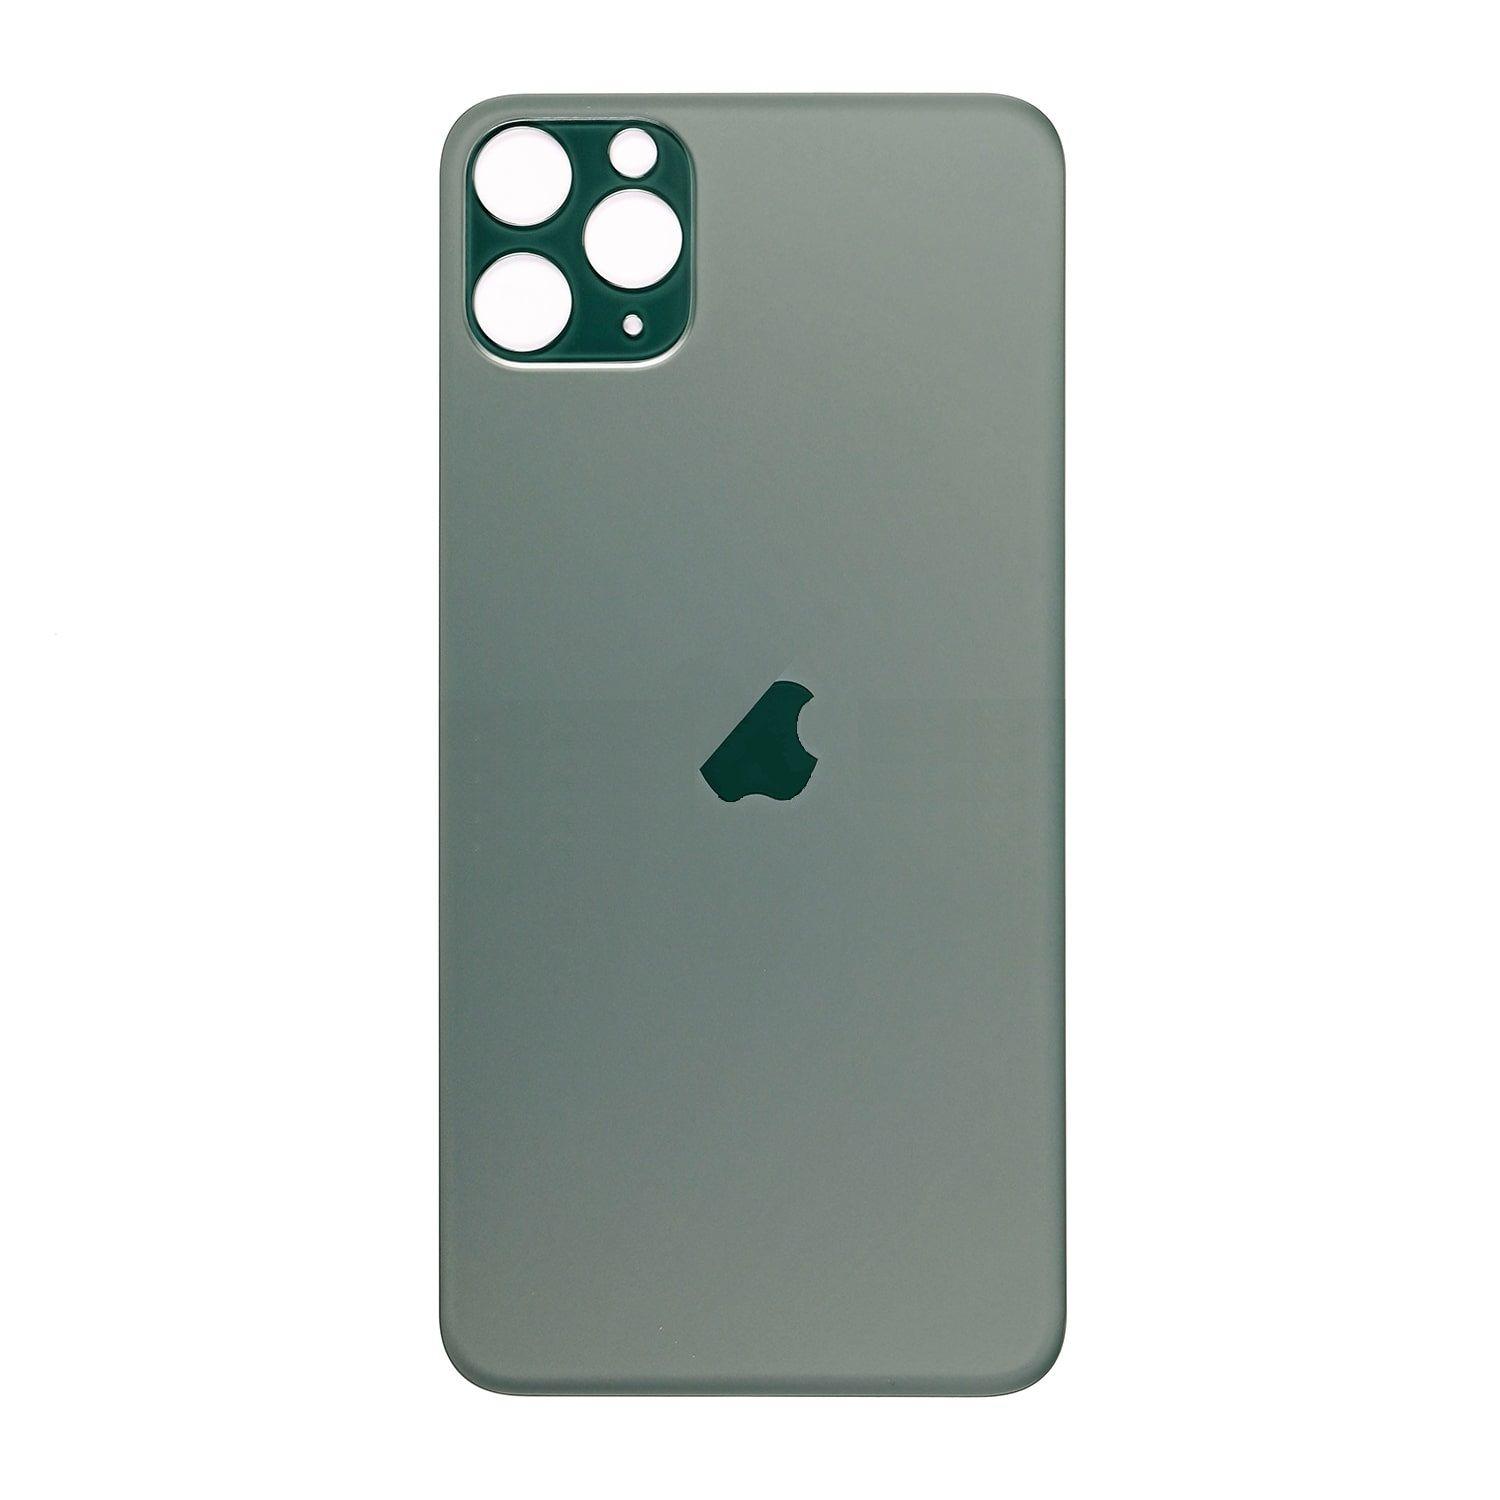 Iphone 11 pro flip green without camera glass